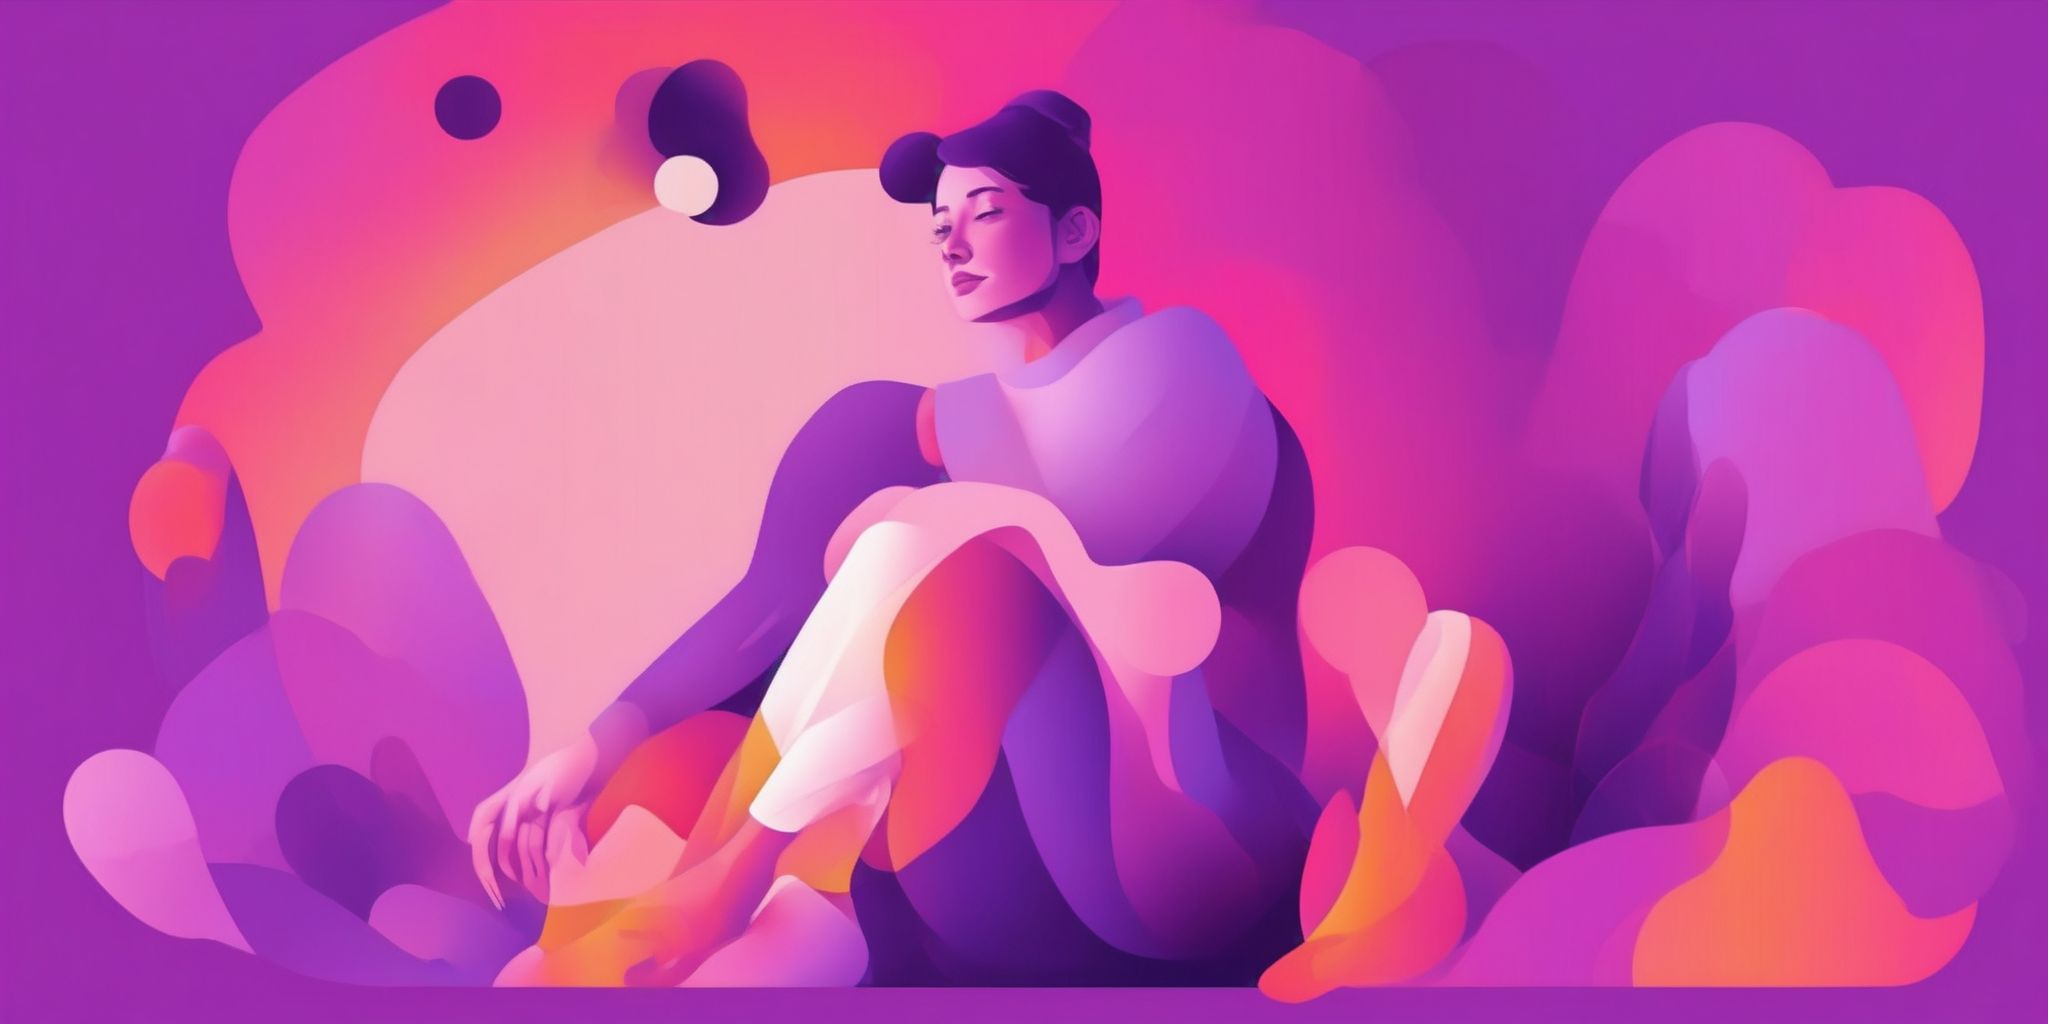 myself in flat illustration style, colorful purple gradient colors